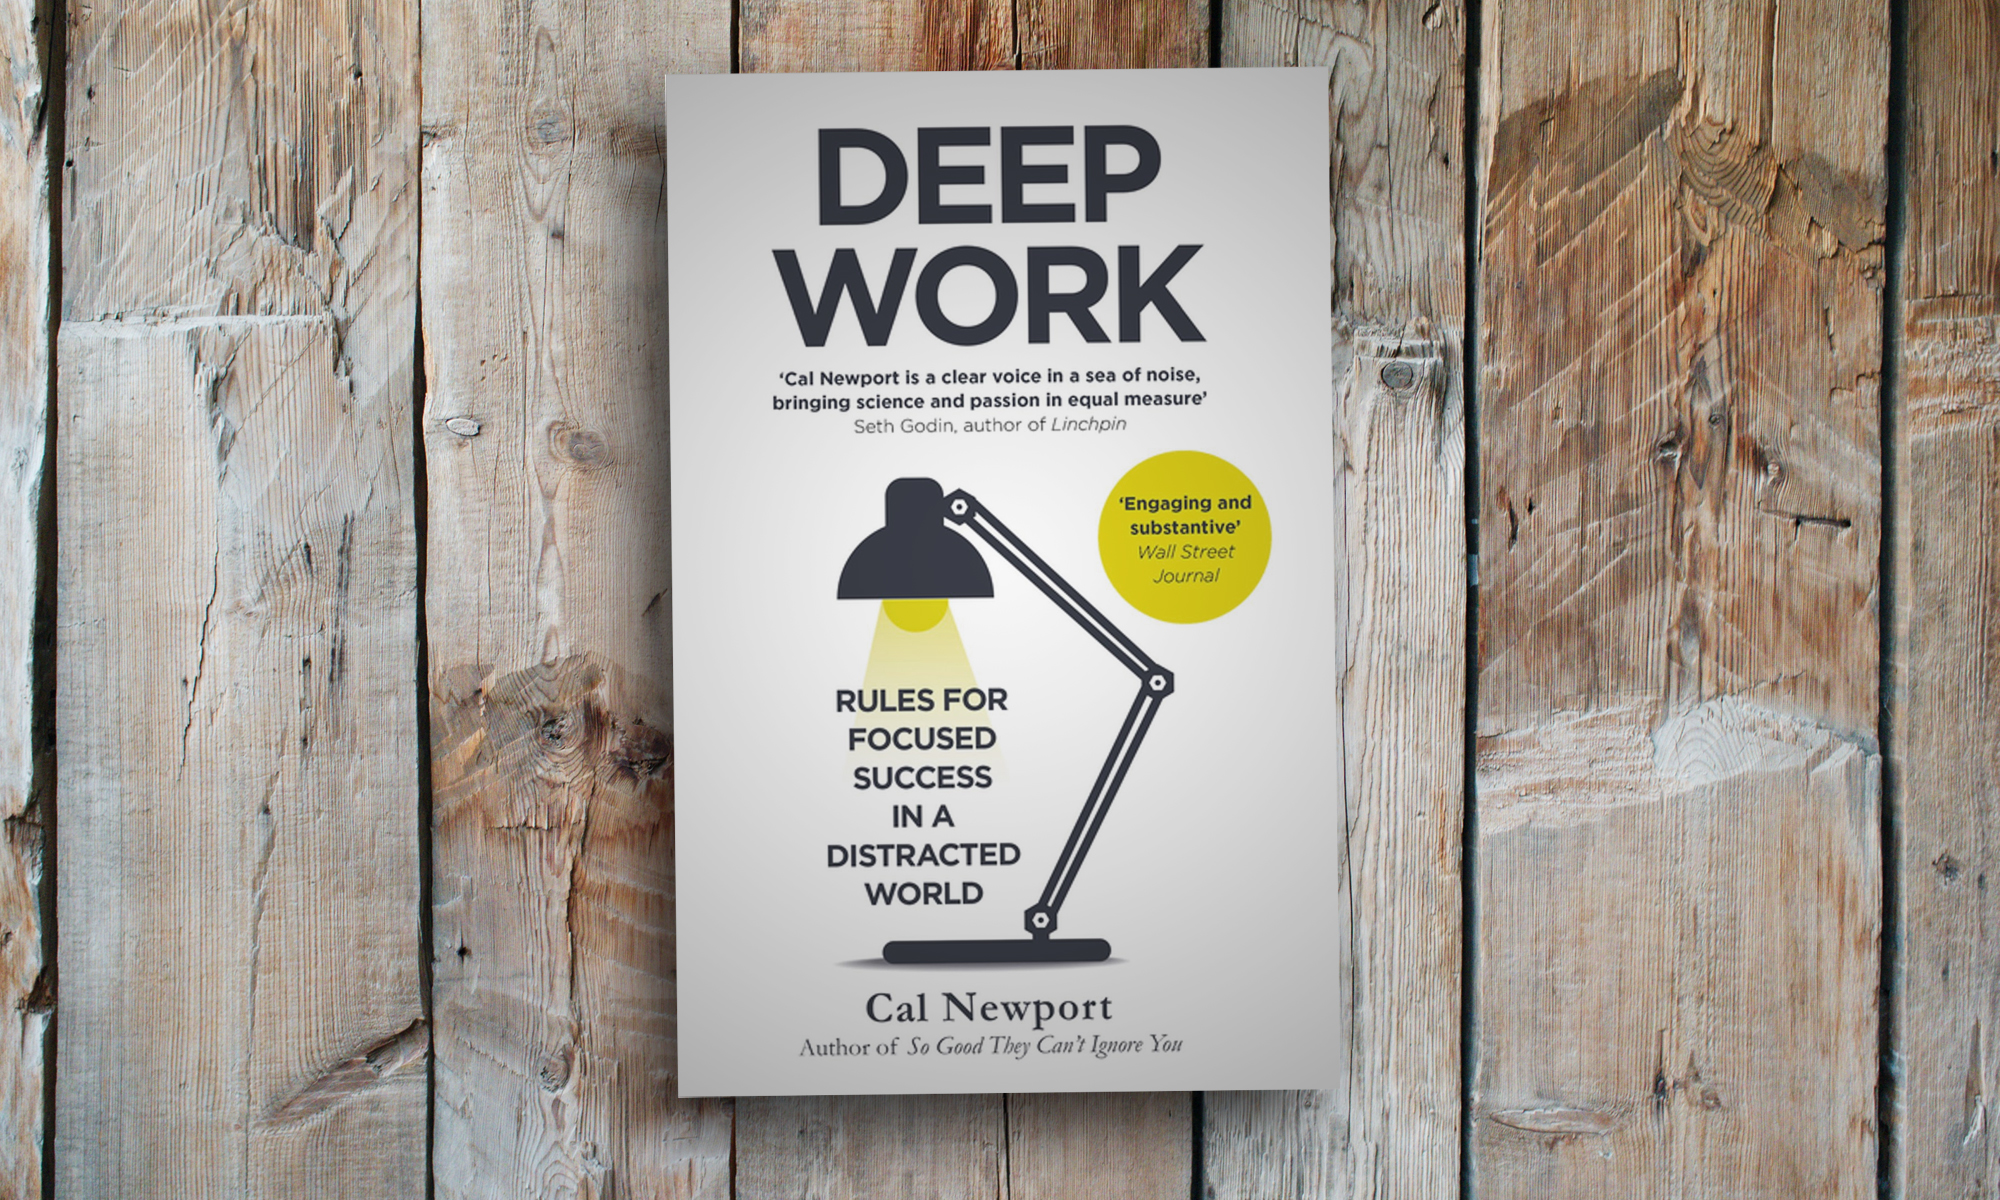 Book review: Deep Work by Cal Newport - It's more of a comment...